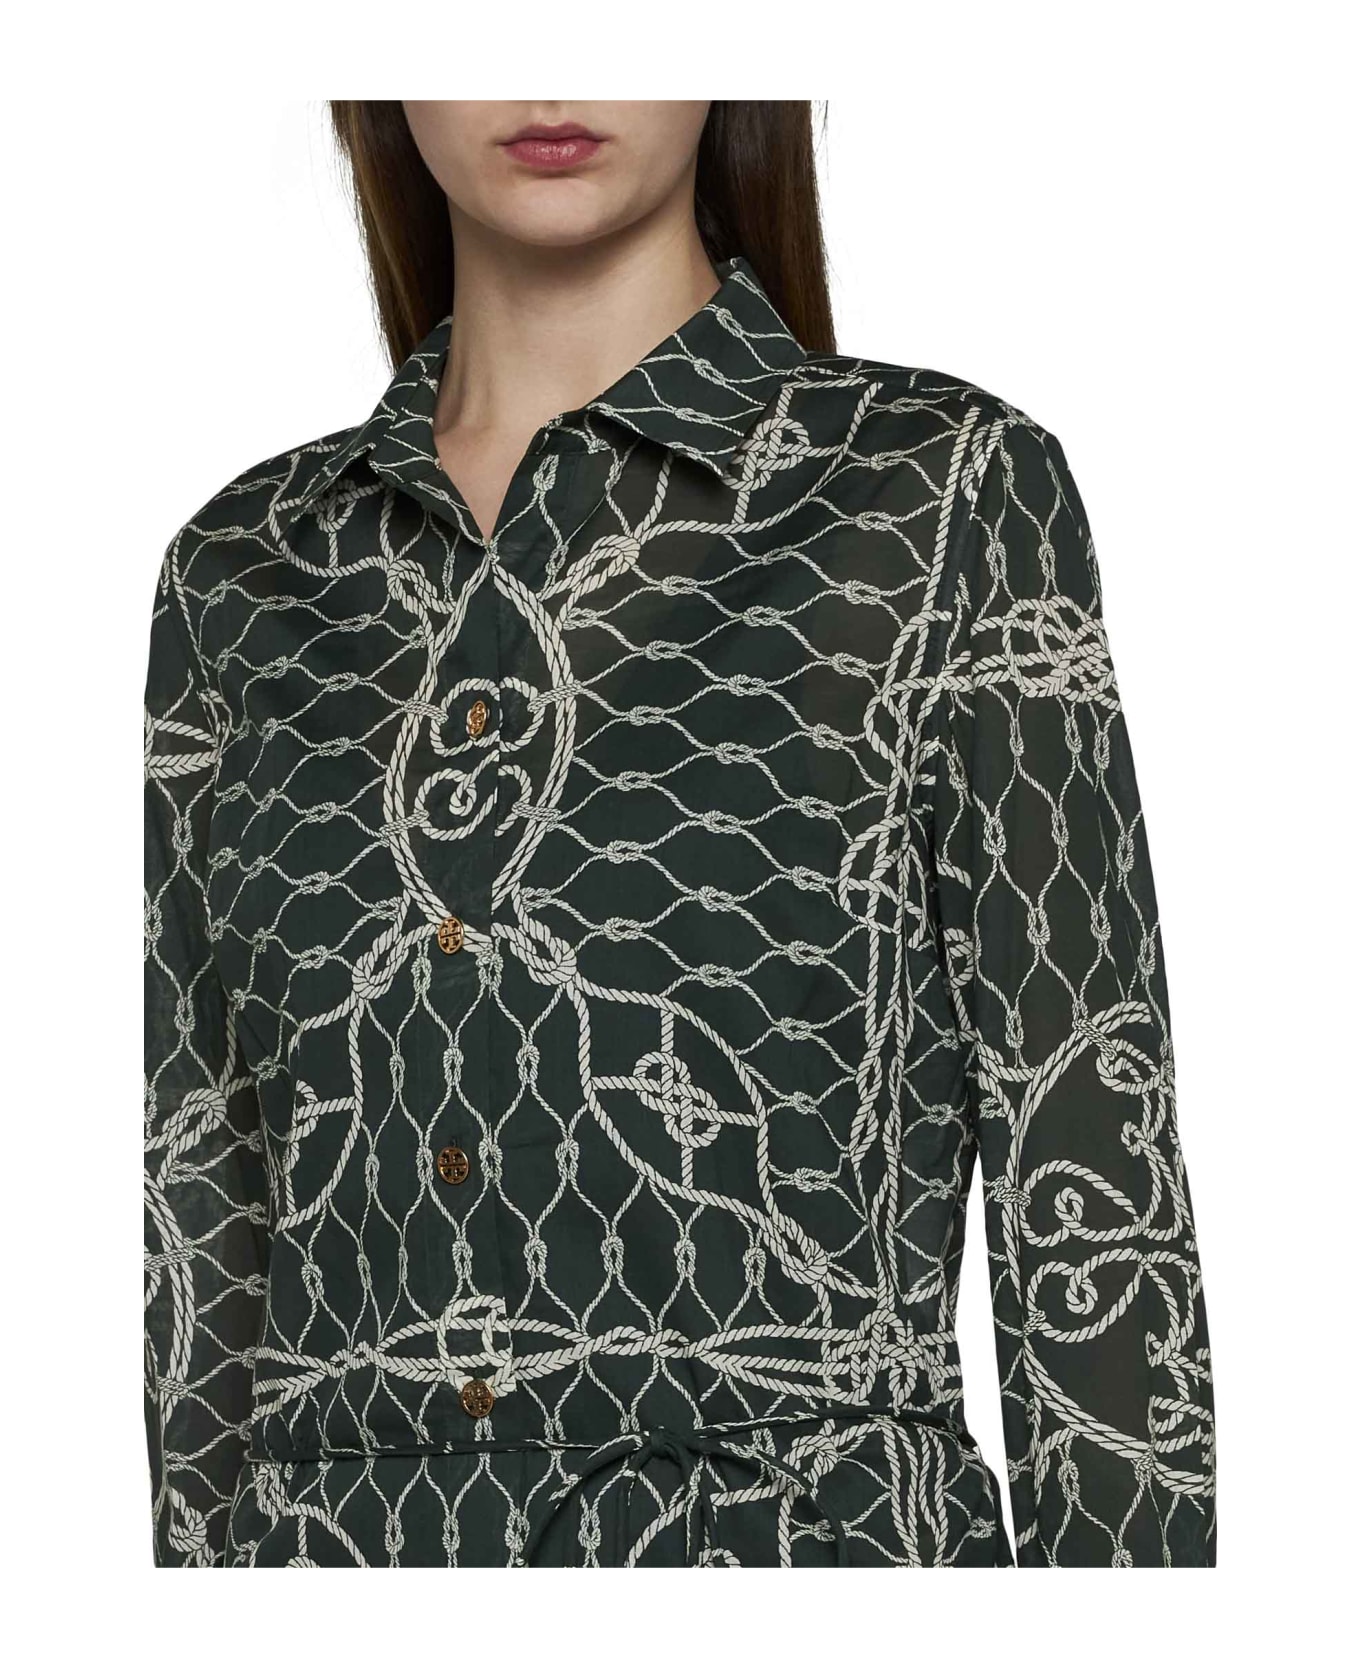 Tory Burch Pattern-printed Long-sleeved Dress - Ivory Knot